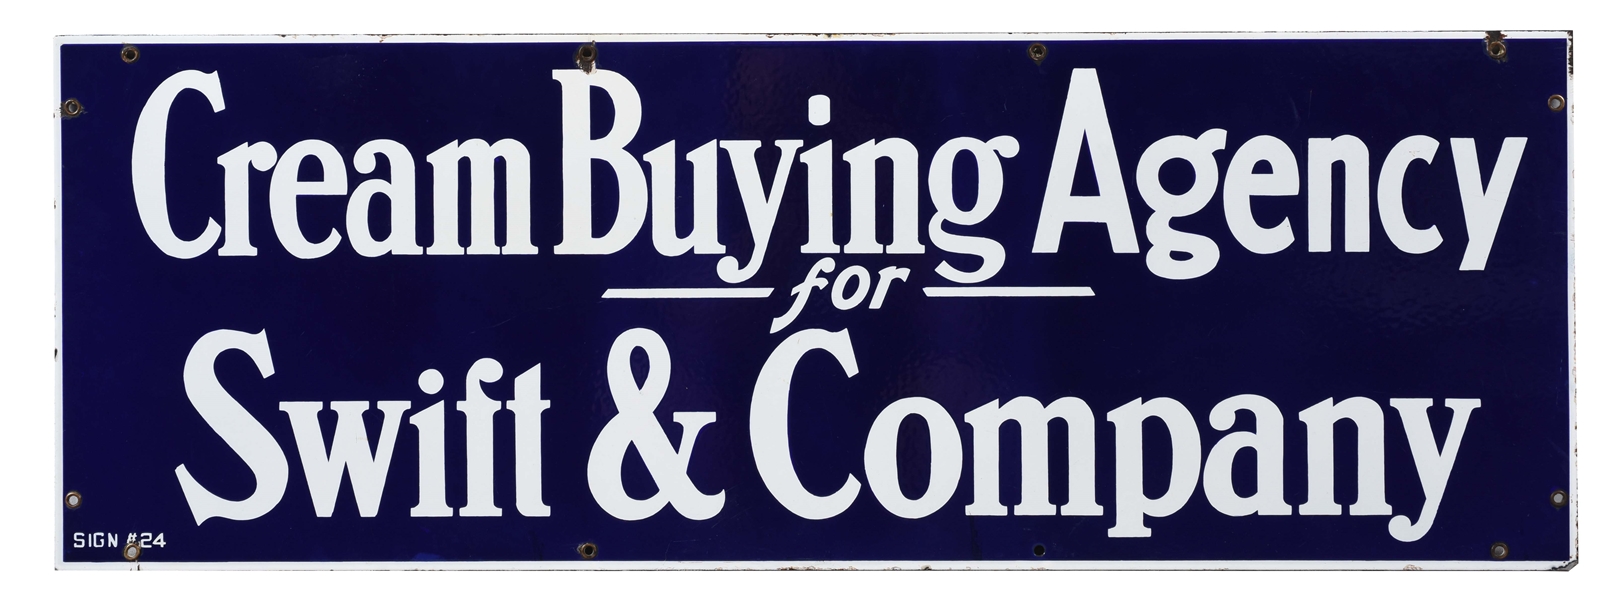 SWIFT COMPANY CREAM BUYING AGENCY PORCELAIN SIGN.